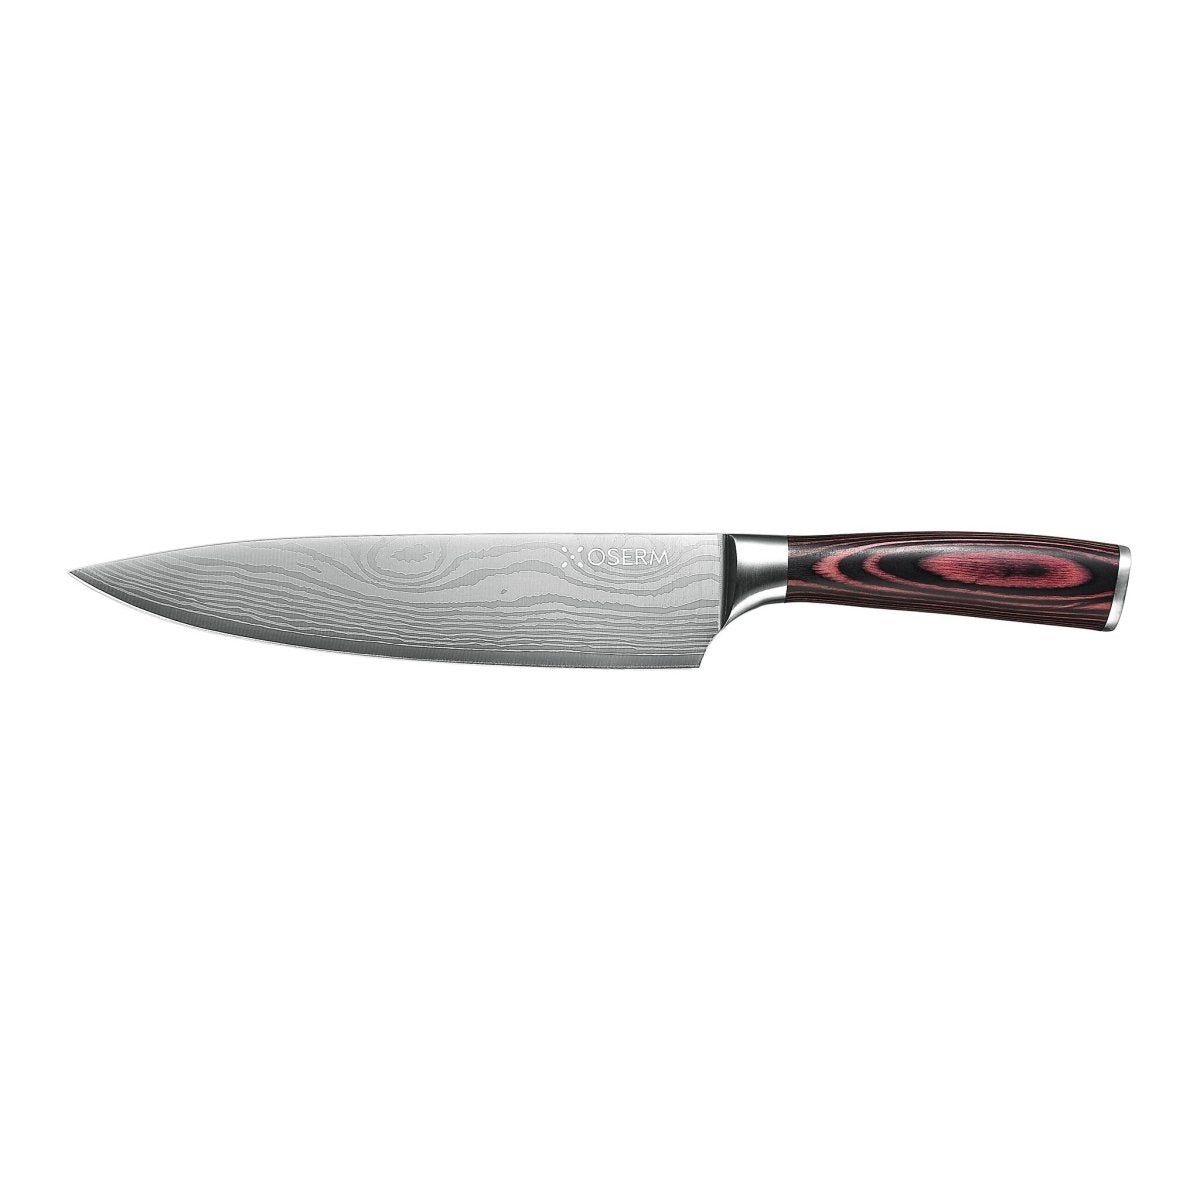 6-Pack - 8-Inch OSERM Chef's Knives